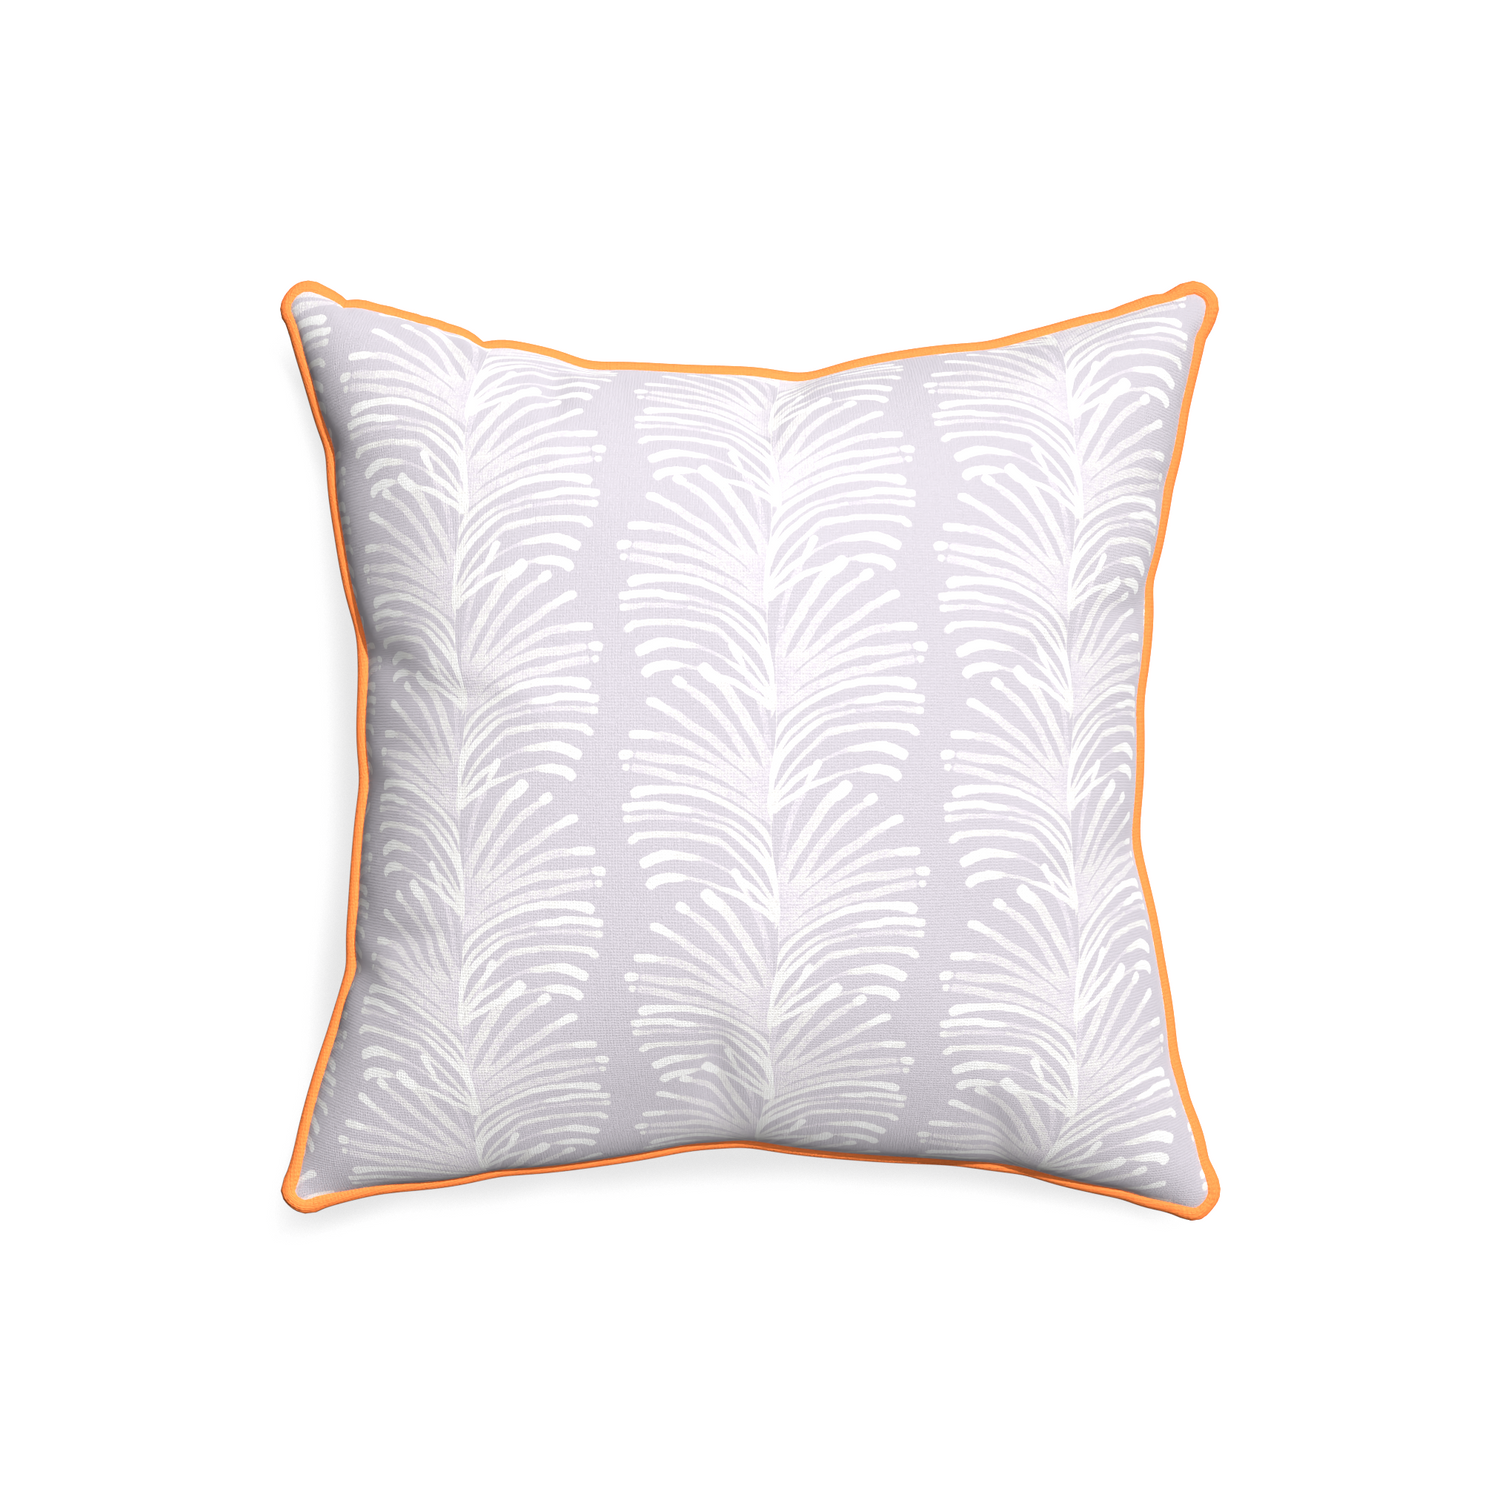 20-square emma lavender custom pillow with clementine piping on white background